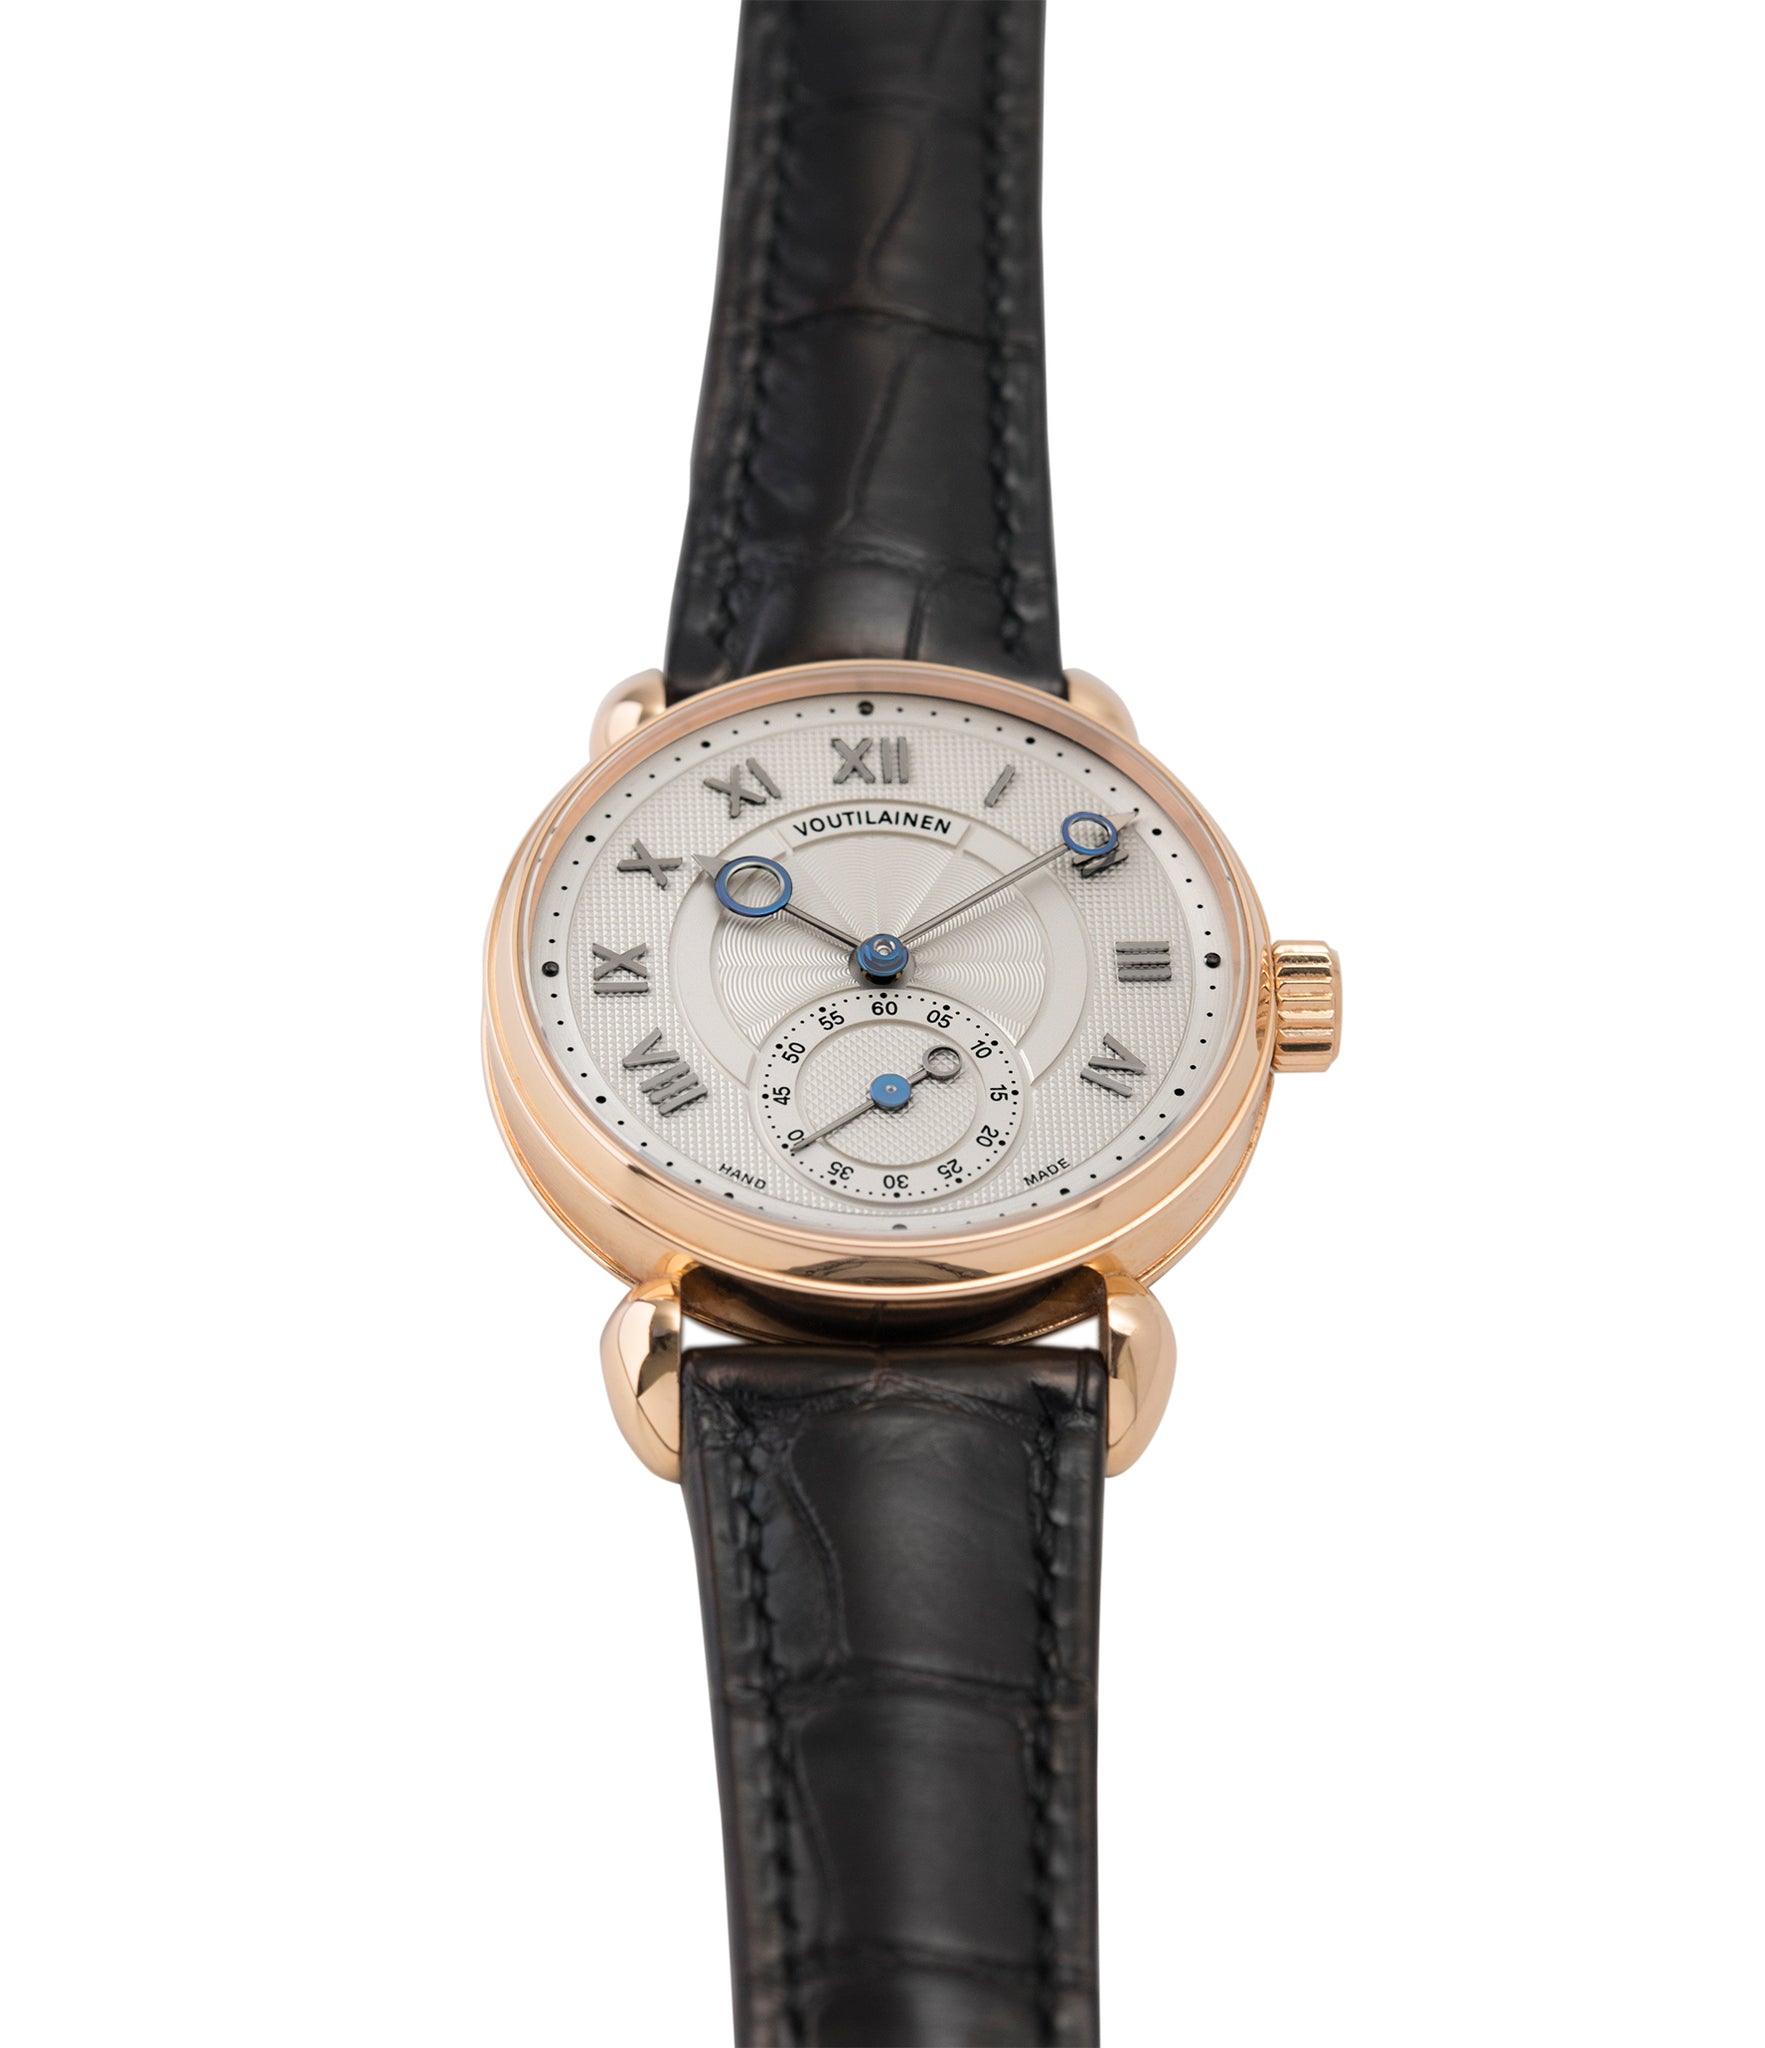 rare watch Voutilainen Observatoire Limited Edition rose gold rare dress watch for sale online at A Collected Man London endorsed seller of independent watchmaker